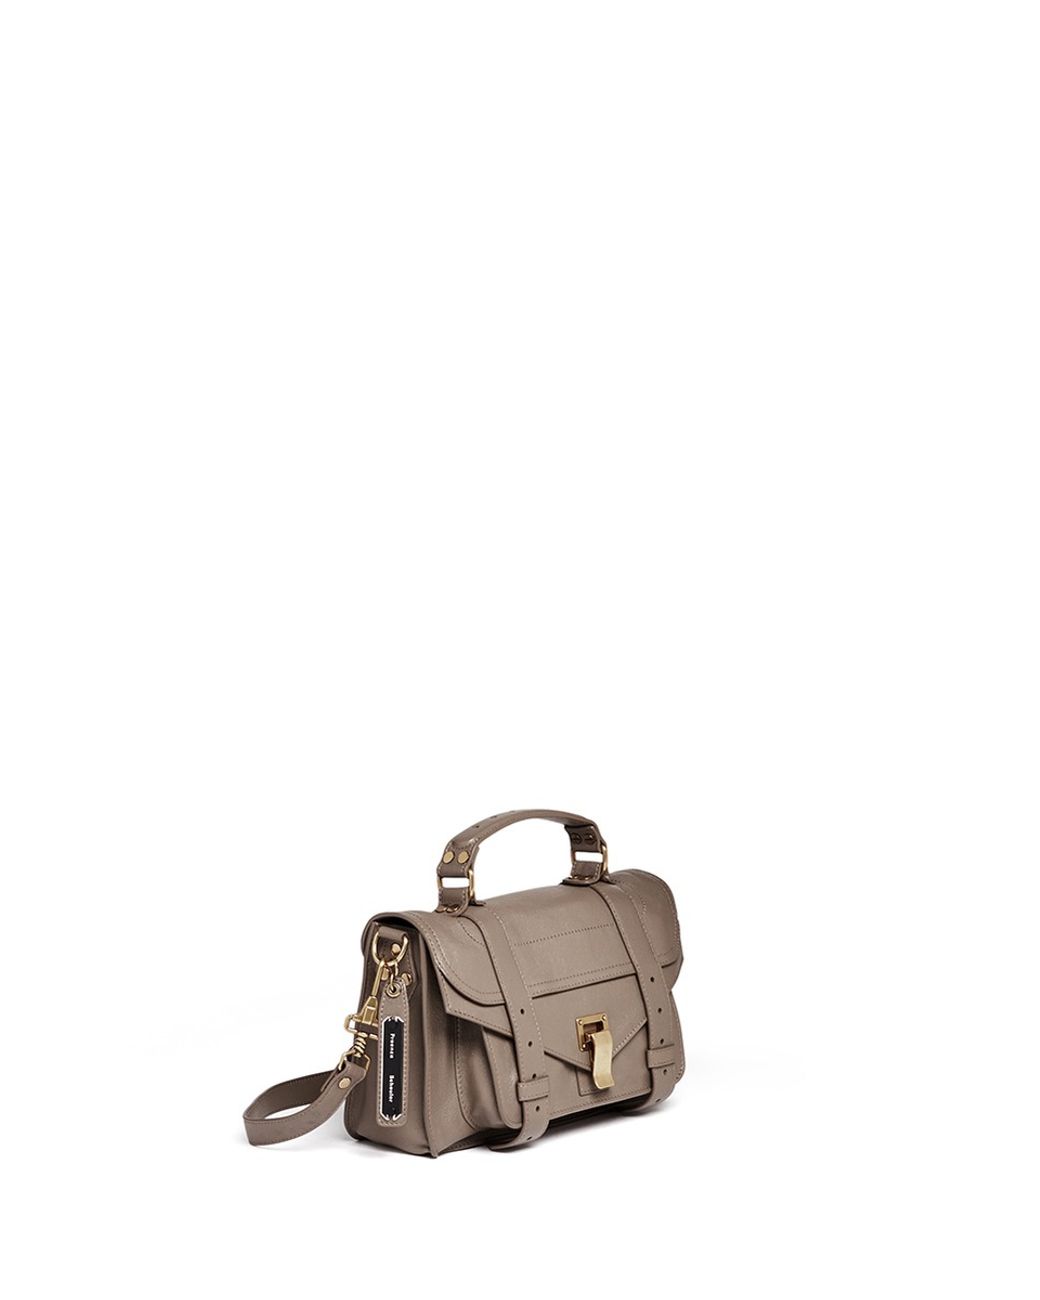 Proenza Schouler 'ps1' Tiny Leather Satchel in Brown | Lyst